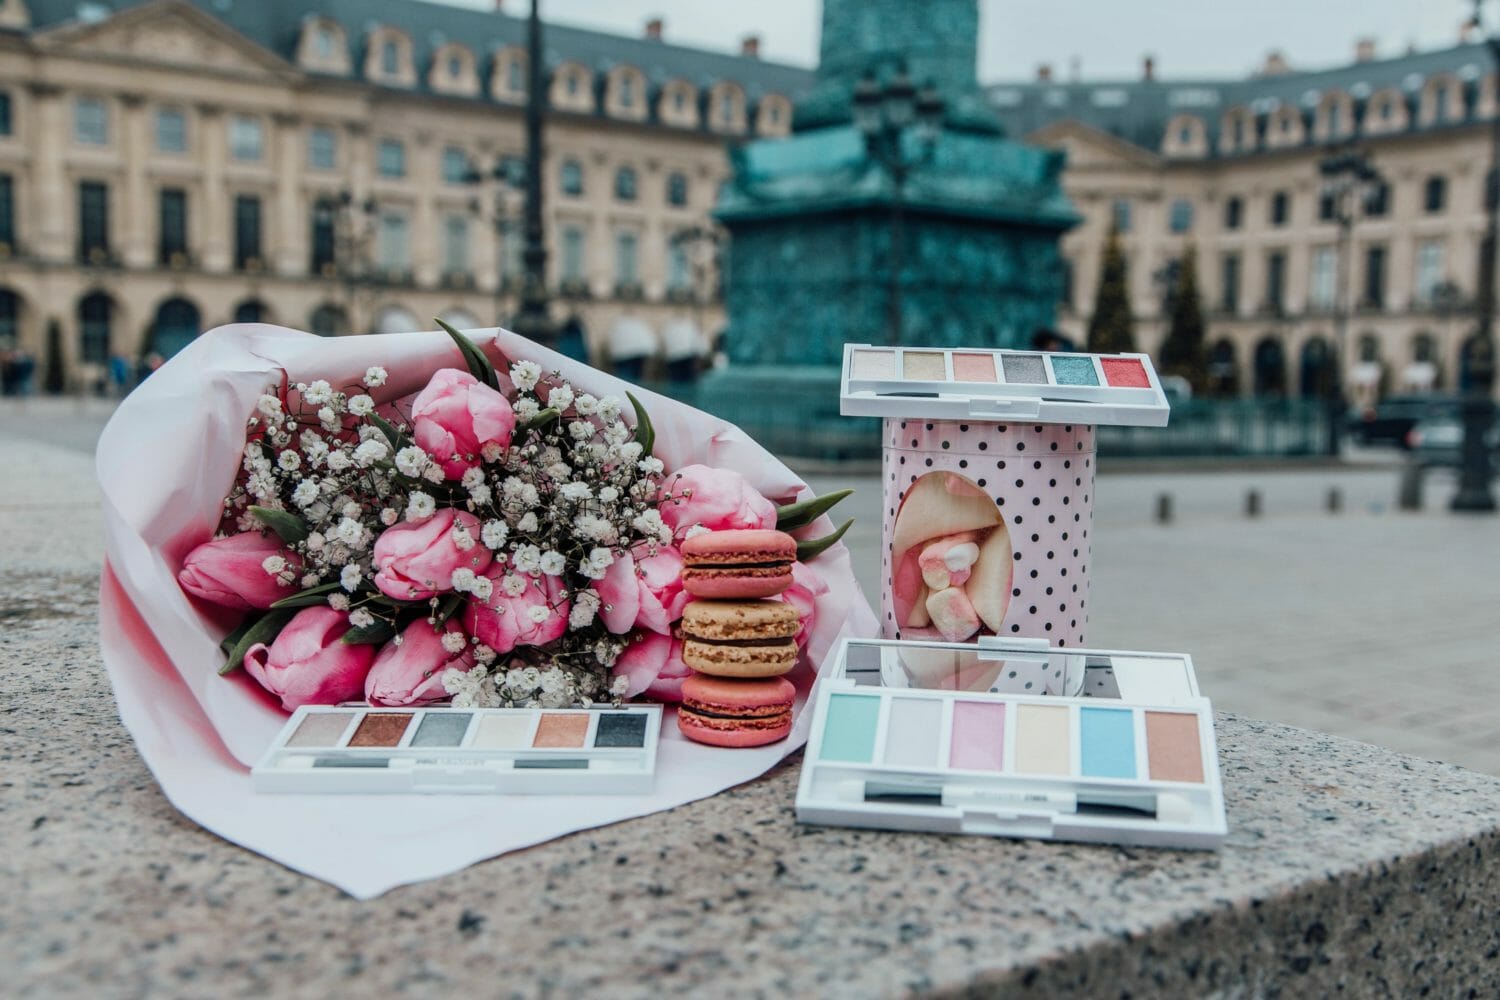 Artistry Studio Parisian Style Edition eye shadow compacts are posed with a bouquet of roses and baby's breath, a stack of macarons and a tin of sweets. Get the effortless "je ne sais quoi" of Parisian girls with our latest collection. Inspired by the style, art, and sweet treats of the City of Lights. Tres chic!